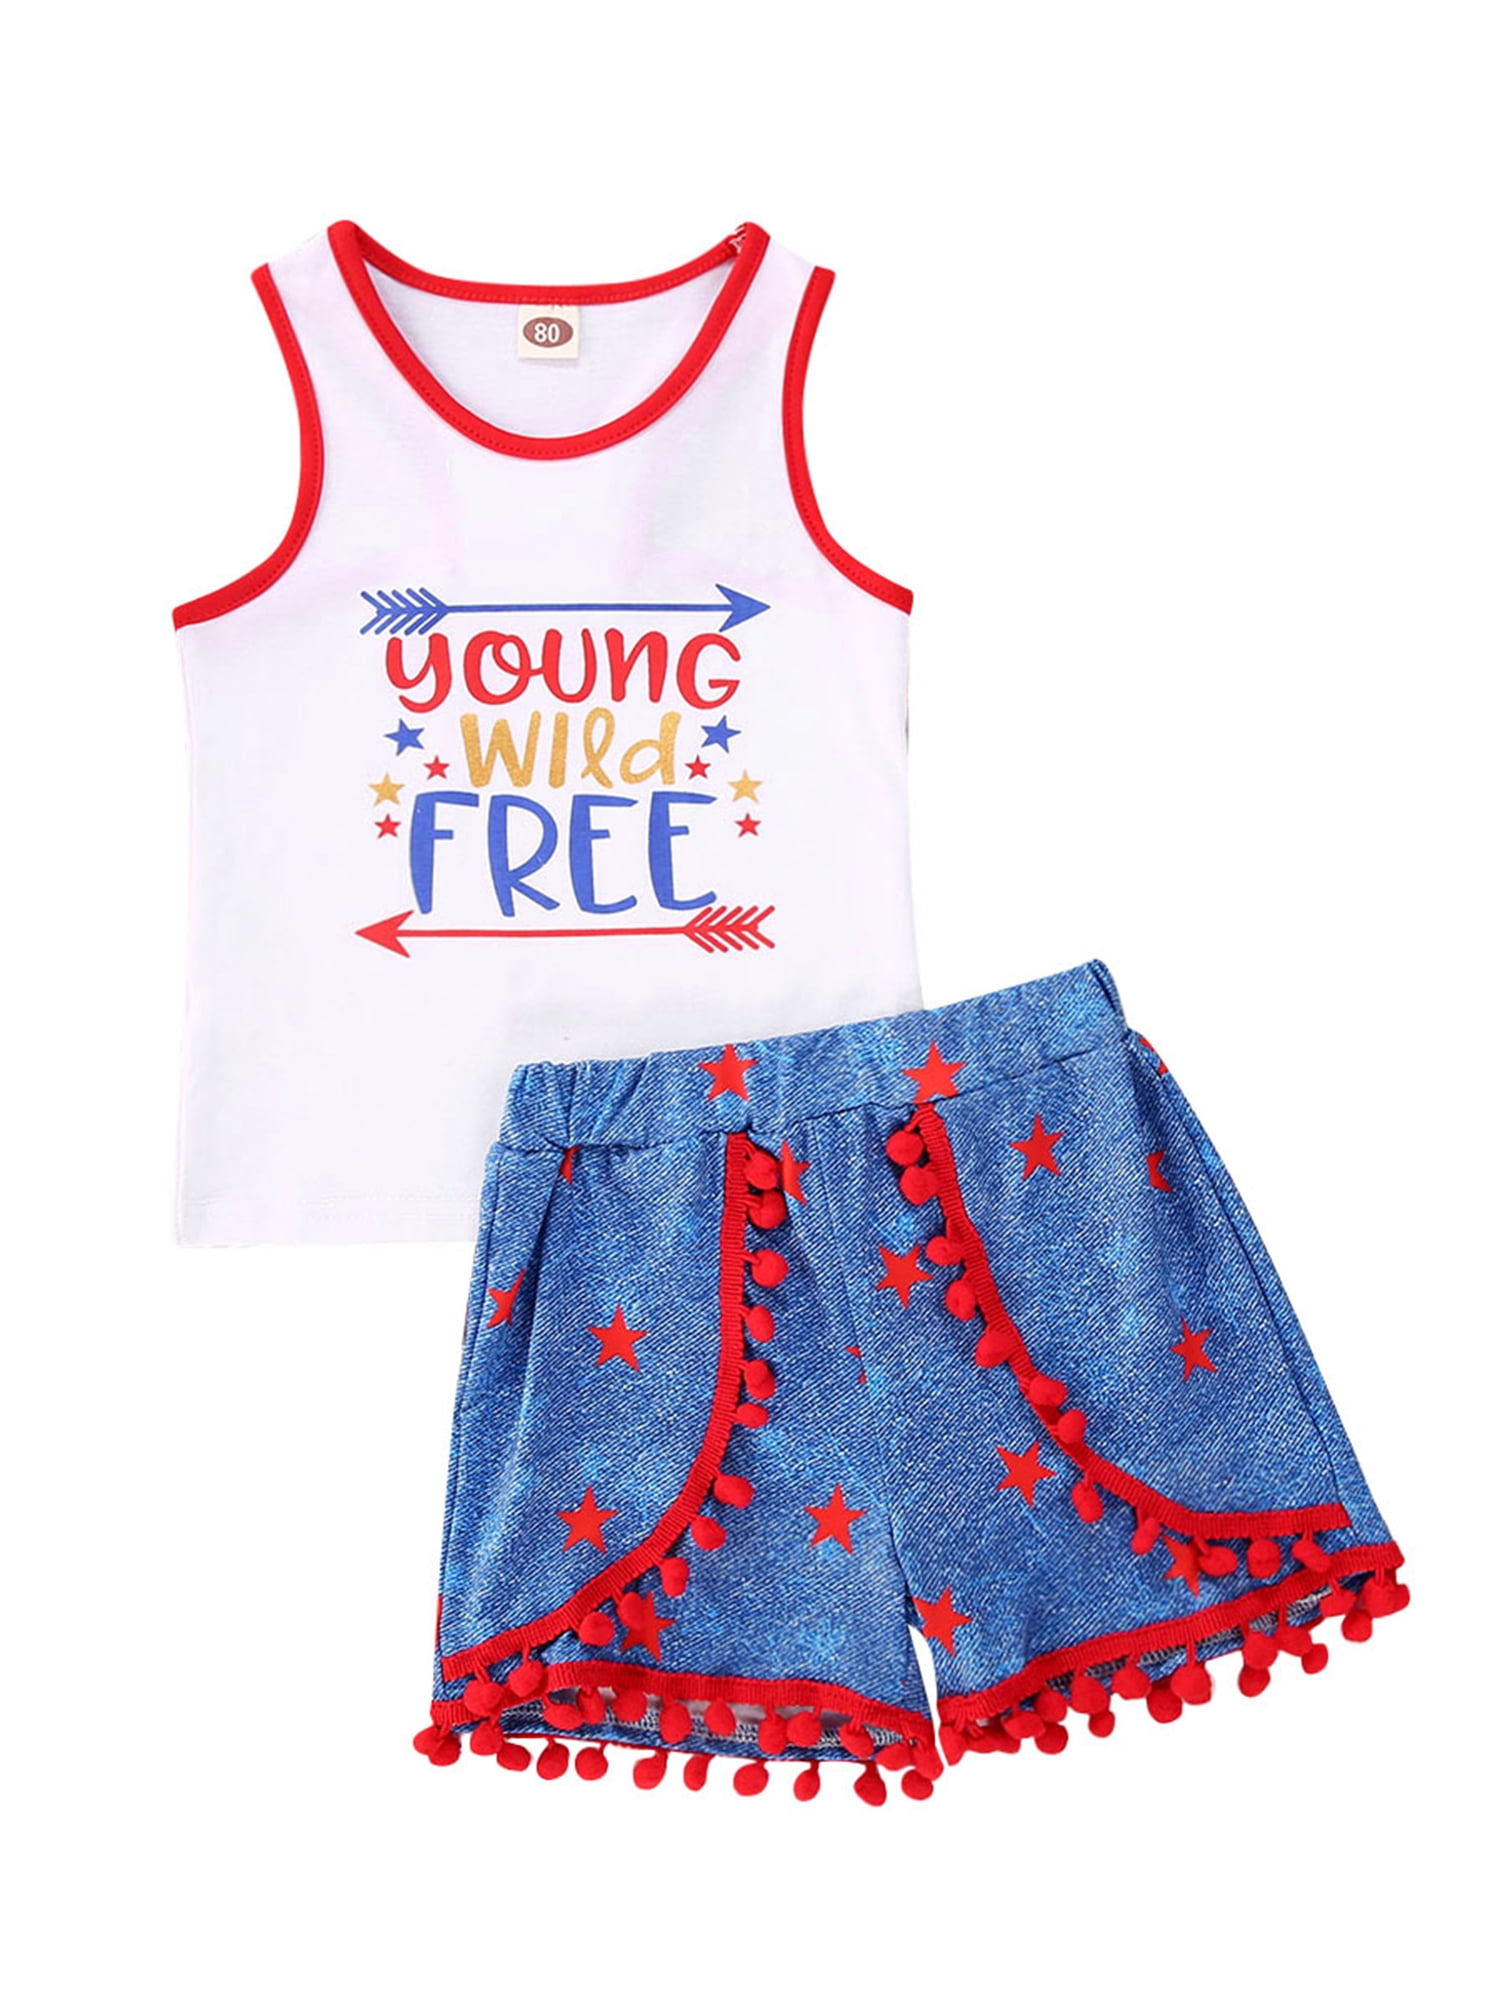 Inevnen 2pcs Baby Girl Holidat Summer Outfit Set,Young Wild Free Vest ...